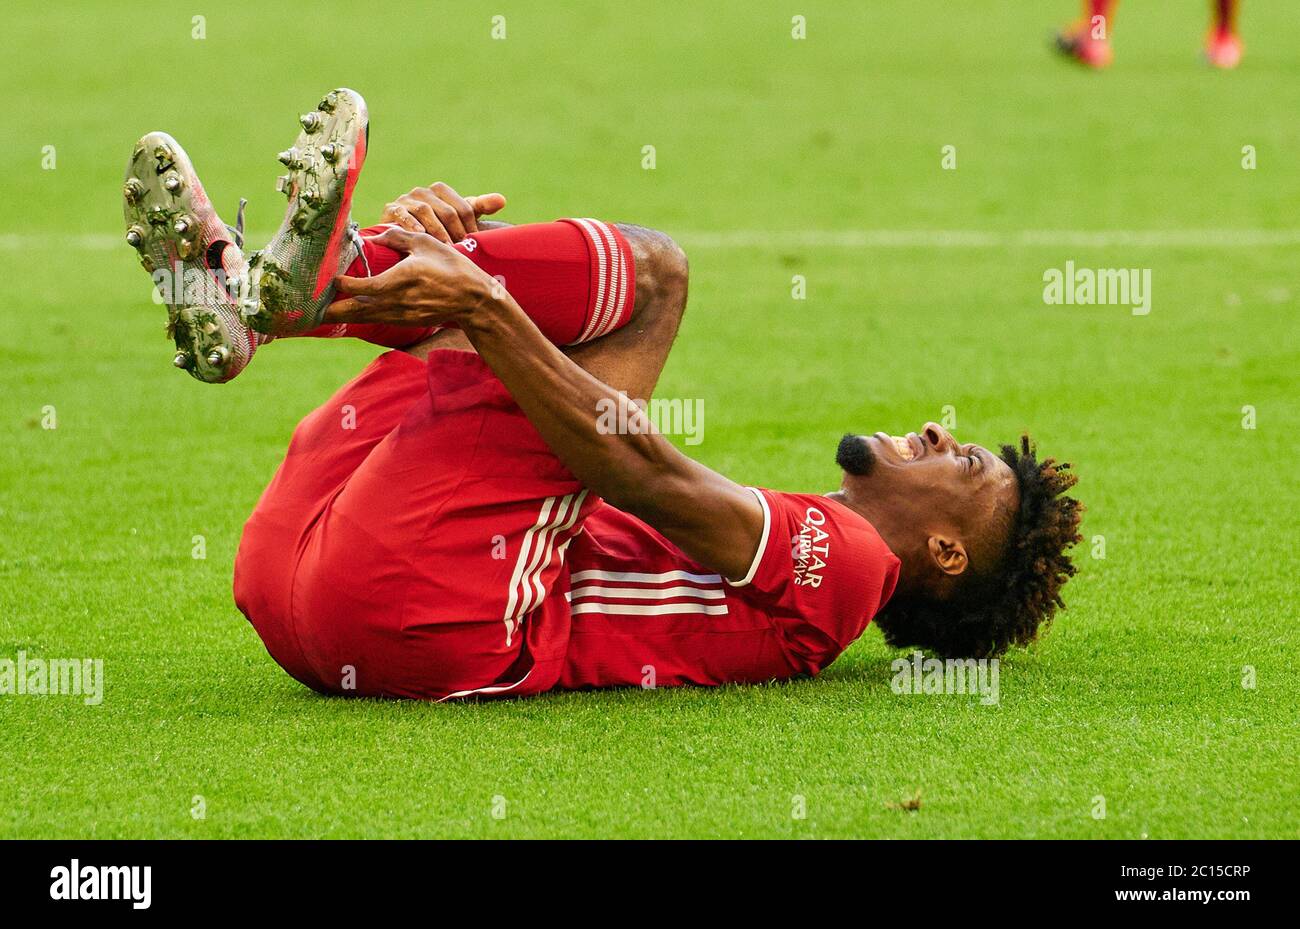 Munich, Germany, 13. Juni 2020,  Kingsley COMAN, FCB 29 verletzt am Boden beim Spiel FC BAYERN Munich - BORUSSIA MOENCHENGLADBACH 2-1 in der 1.Bundesliga, Saison 2019/2020, 31.Spieltag, Gladbach,  © Peter Schatz / Alamy Live News   Important: DFL REGULATIONS PROHIBIT ANY USE OF PHOTOGRAPHS as IMAGE SEQUENCES and/or QUASI-VIDEO -  National and international News-Agencies OUT Editorial Use ONLY Stock Photo